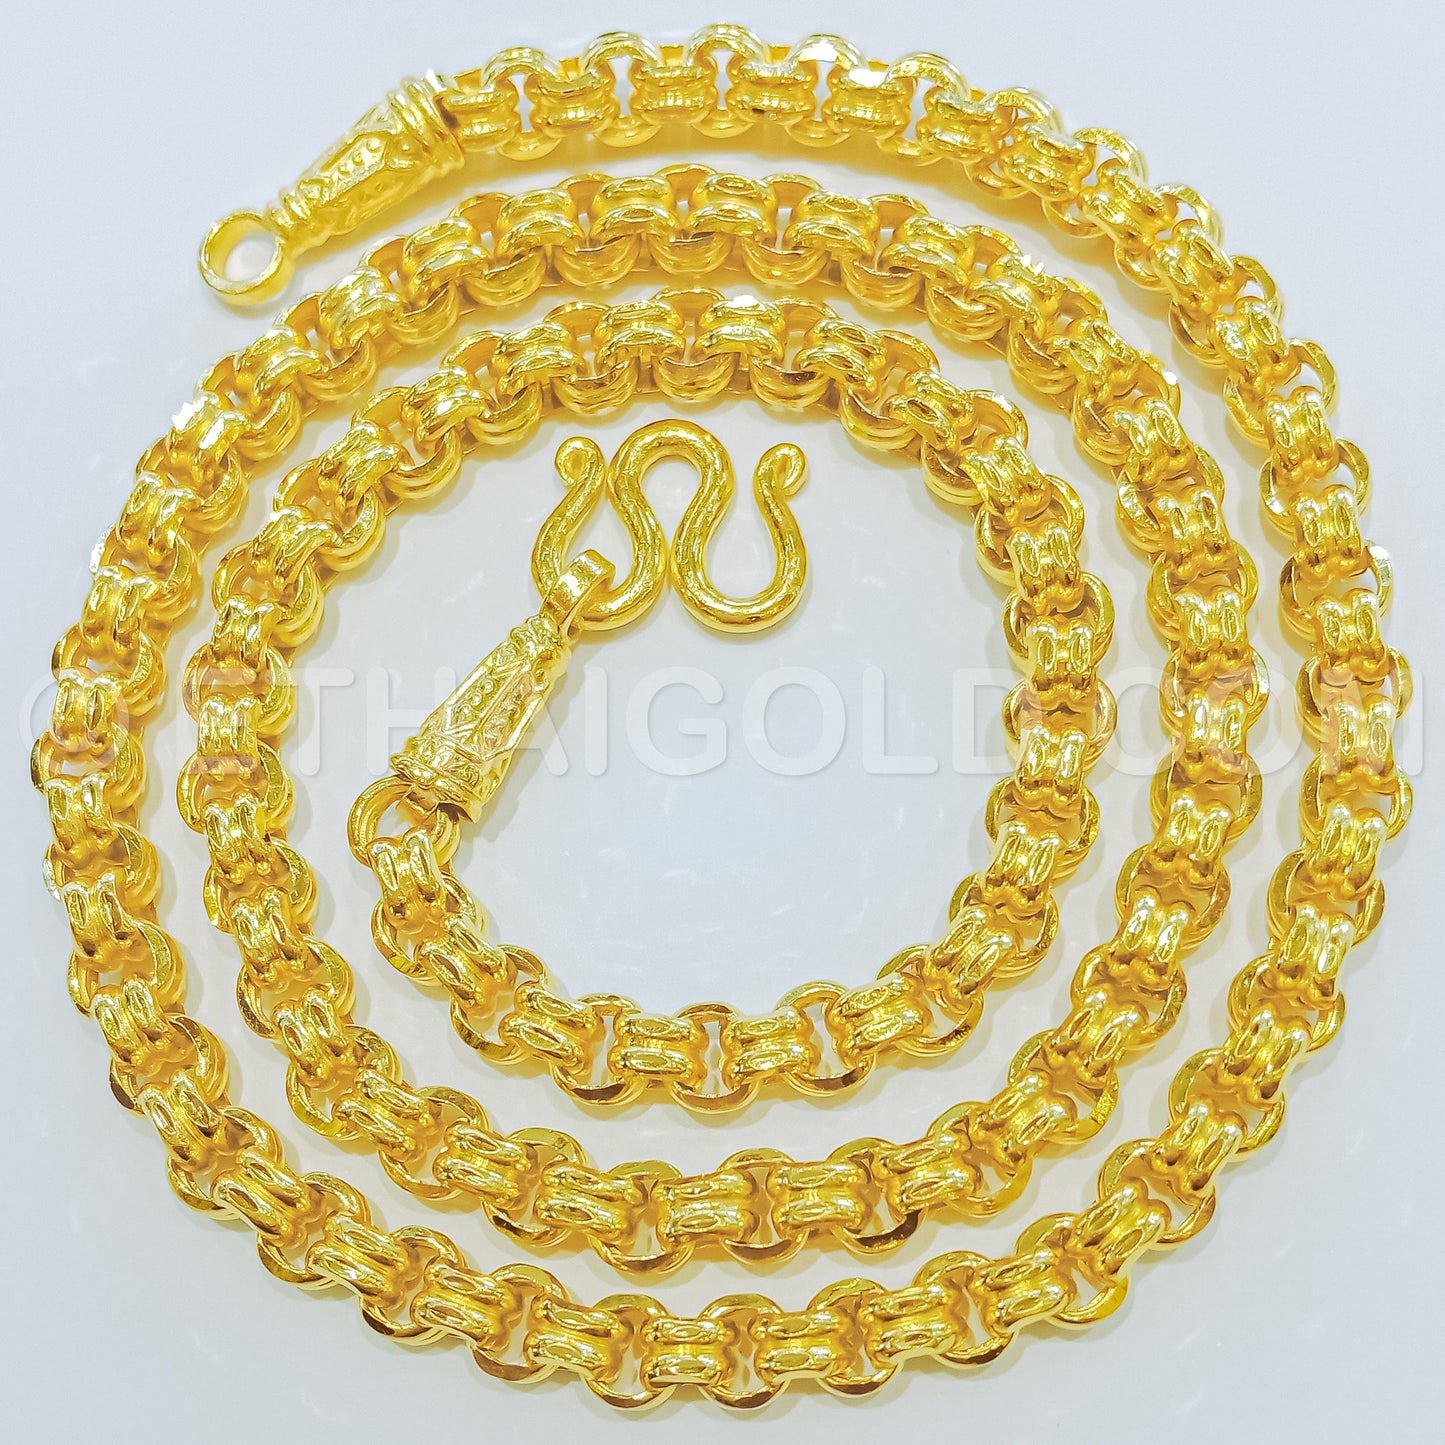 2 BAHT POLISHED DIAMOND-CUT SOLID DOUBLE LINK CHAIN NECKLACE IN 23K GOLD (ID: N3302B)